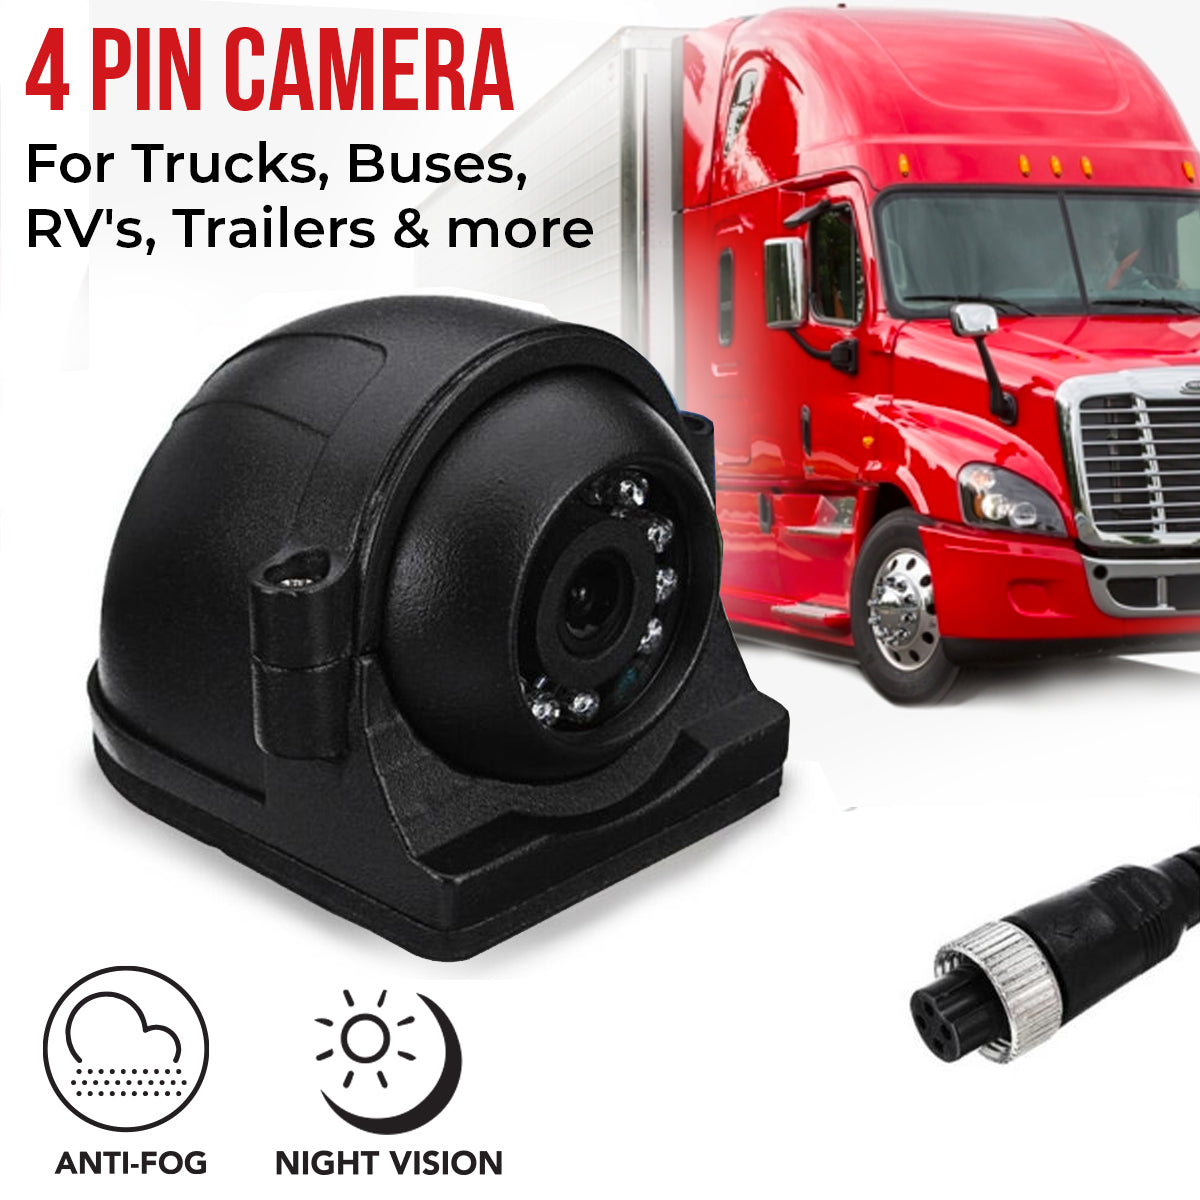 Dash Cam Live Streaming MNVR 3-8 Cam 1080N System with 4G, WIFI, GPS